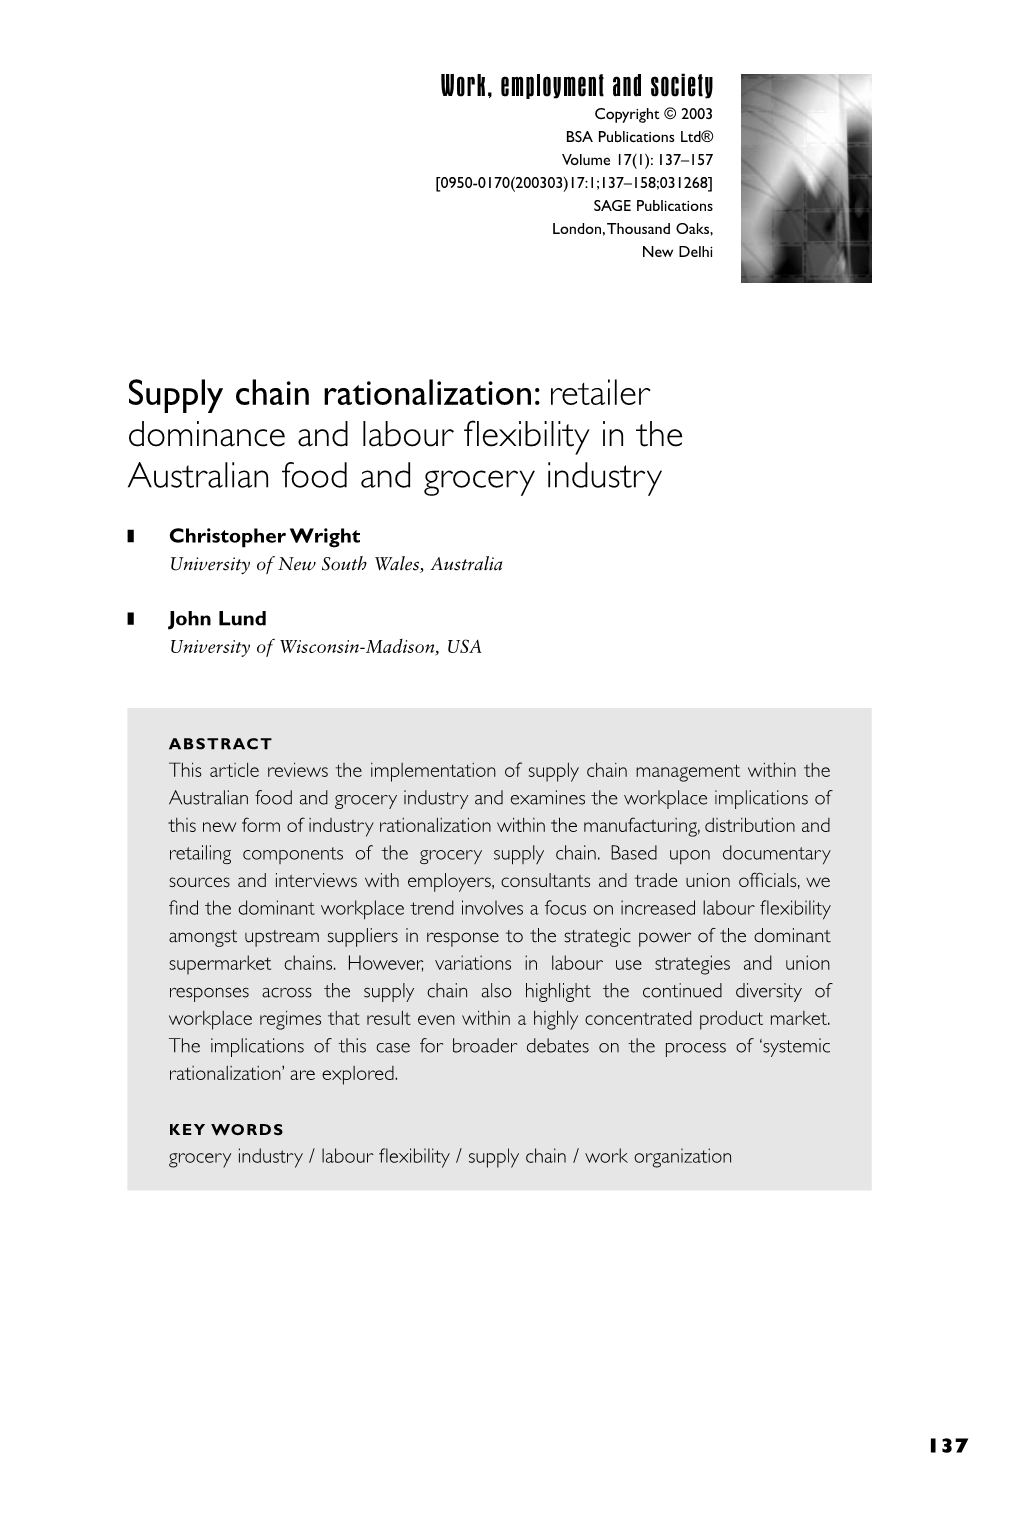 Supply Chain Rationalization: Retailer Dominance and Labour ﬂexibility in the Australian Food and Grocery Industry